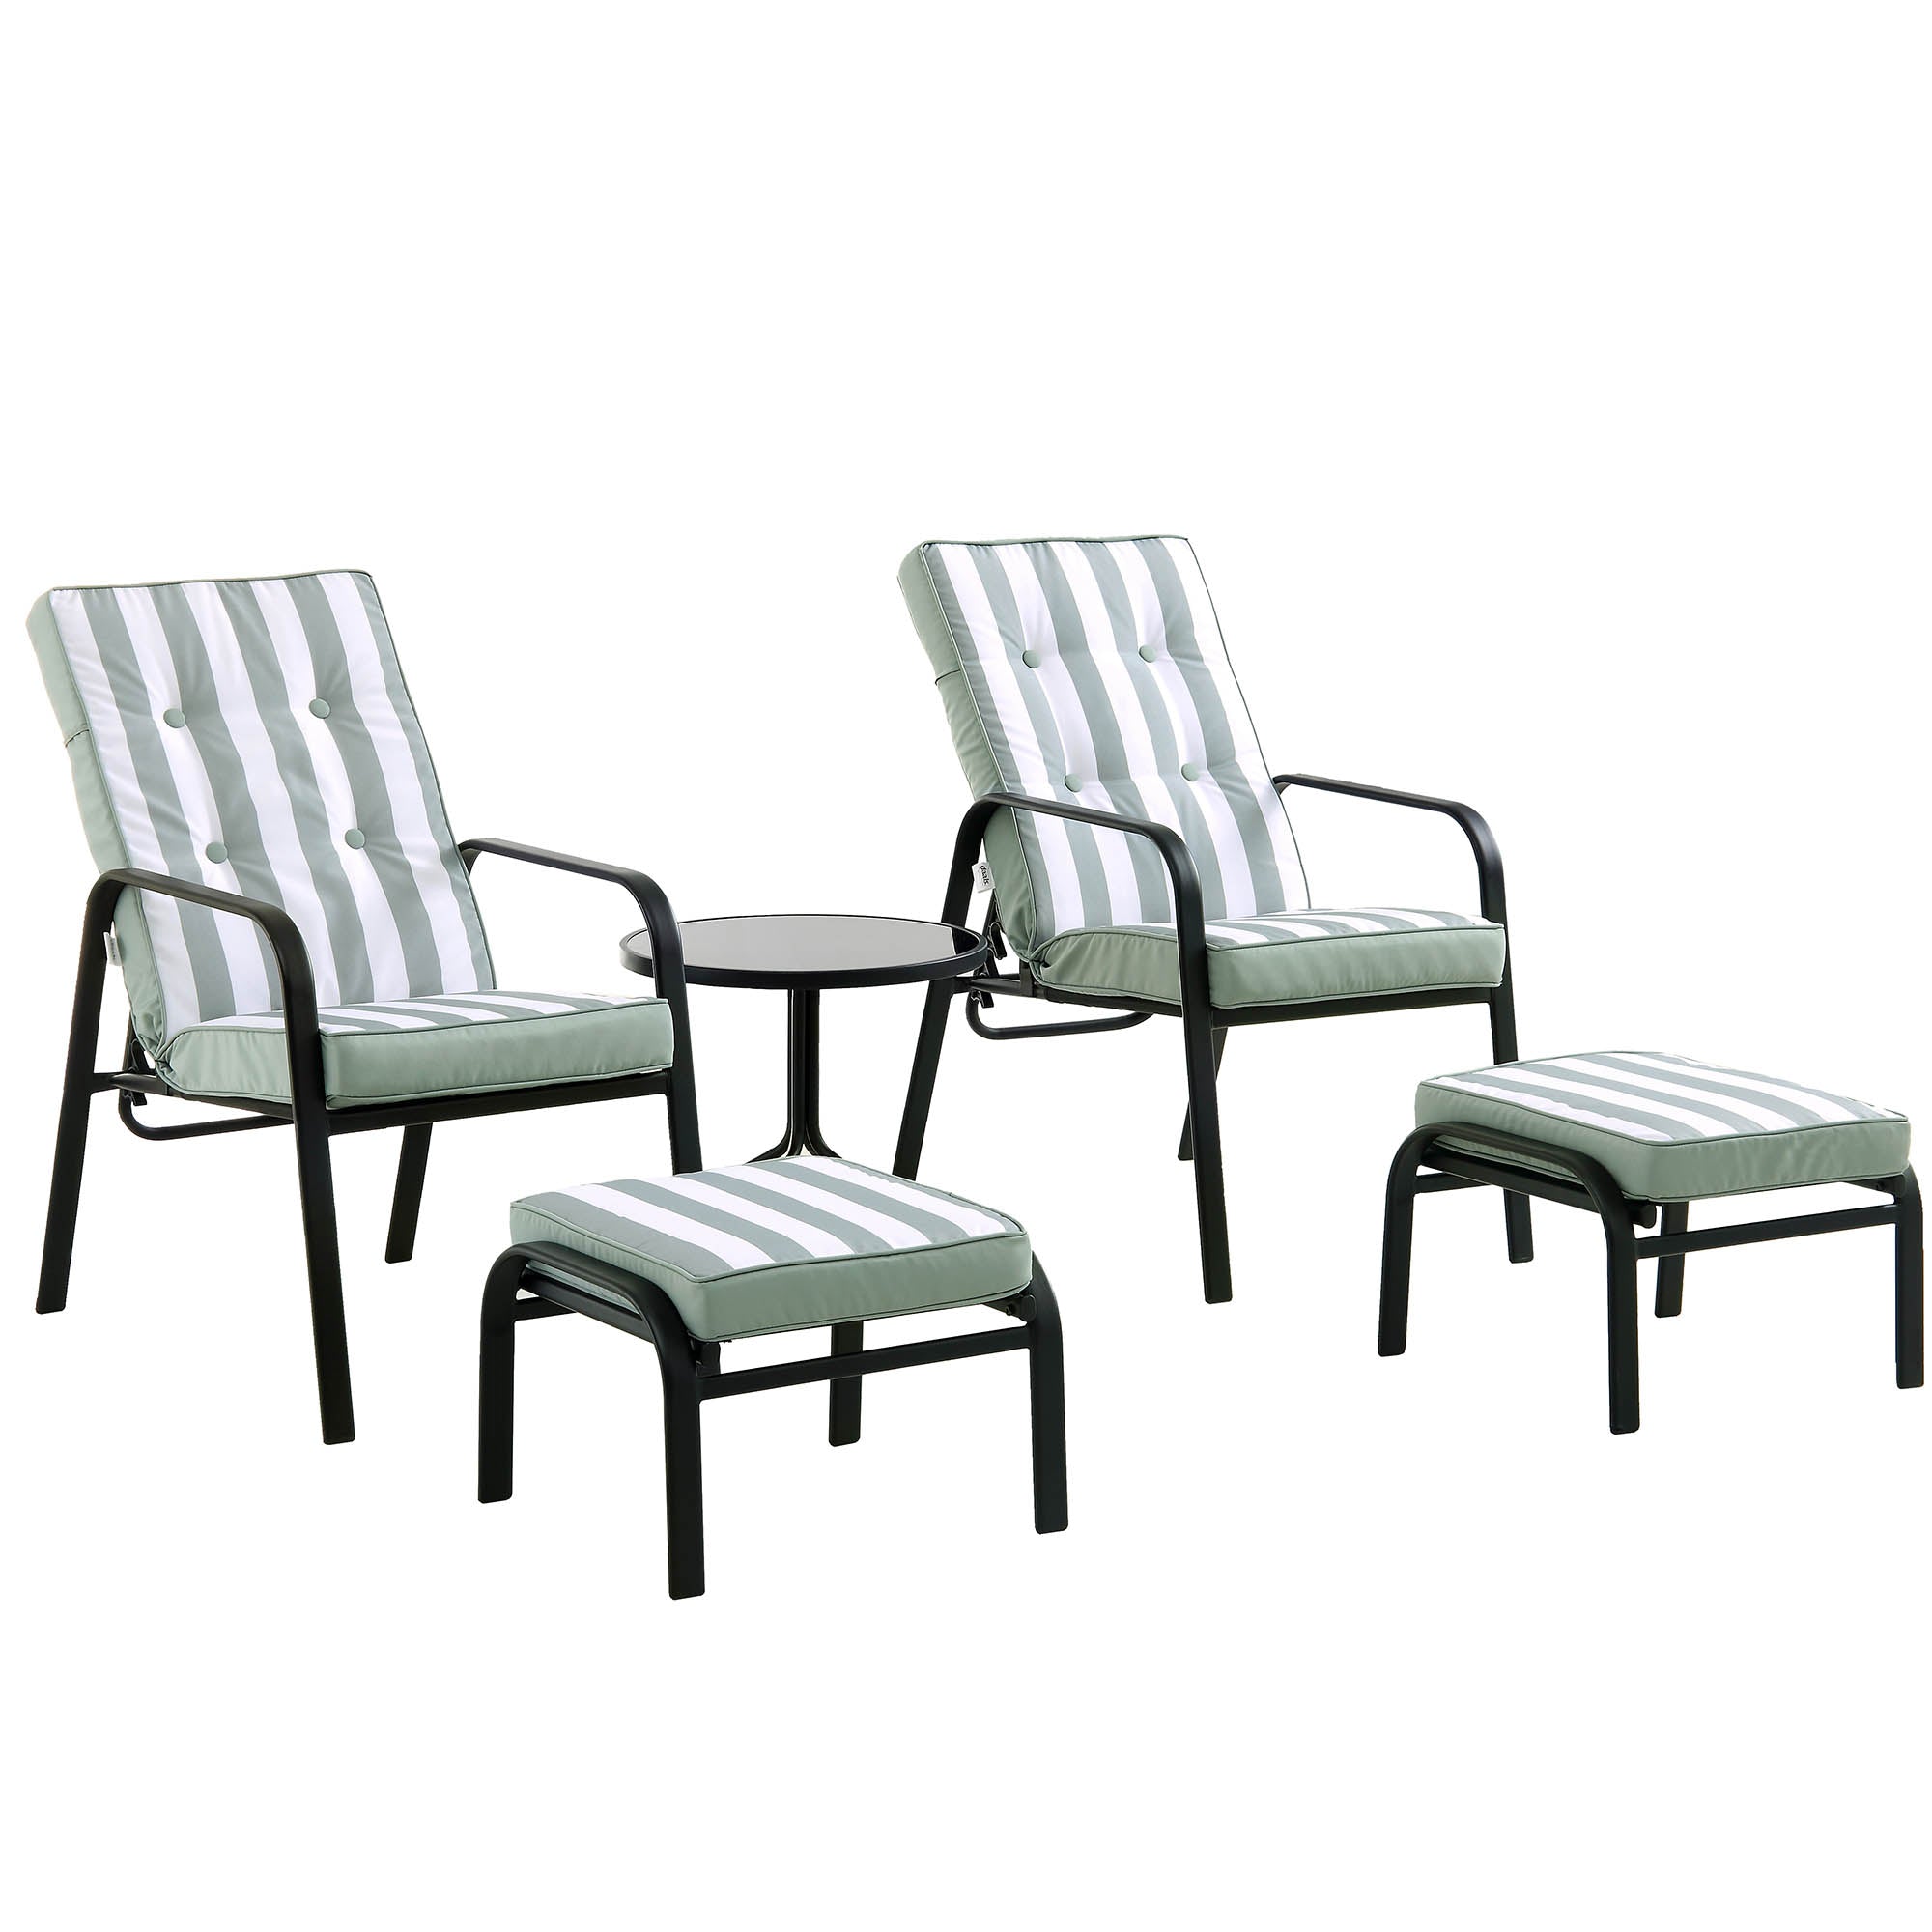 Champneys 2-Seater Steel and Fabric Outdoor Reclining Bistro Set with Stool, Sage Green